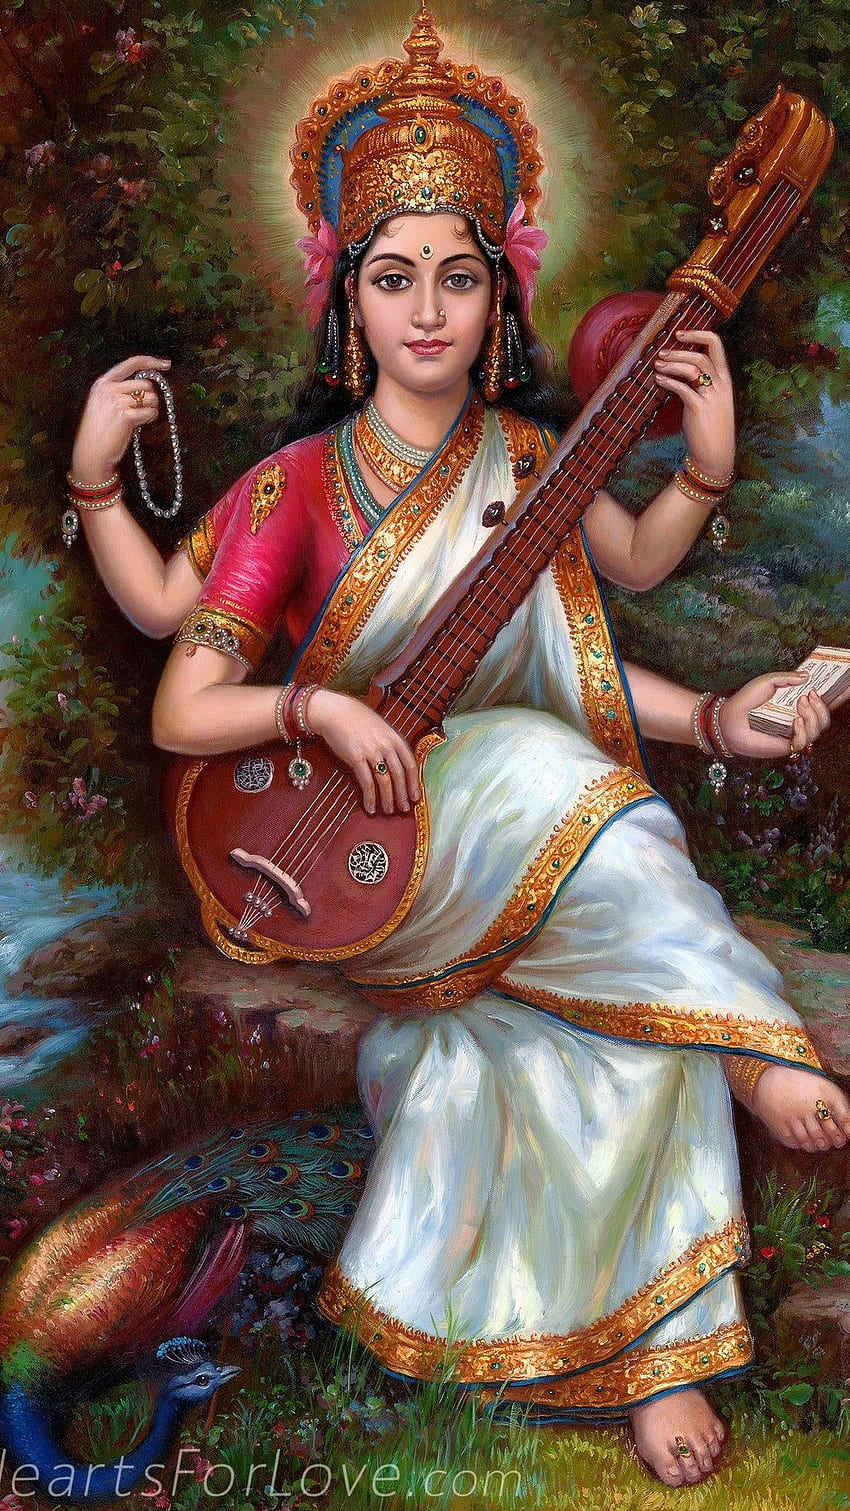 n this illustration, Saraswati is wearing a red and ivory sari while playing a veena. The goddess has four arms in this depiction and wears a golden headpiece. 